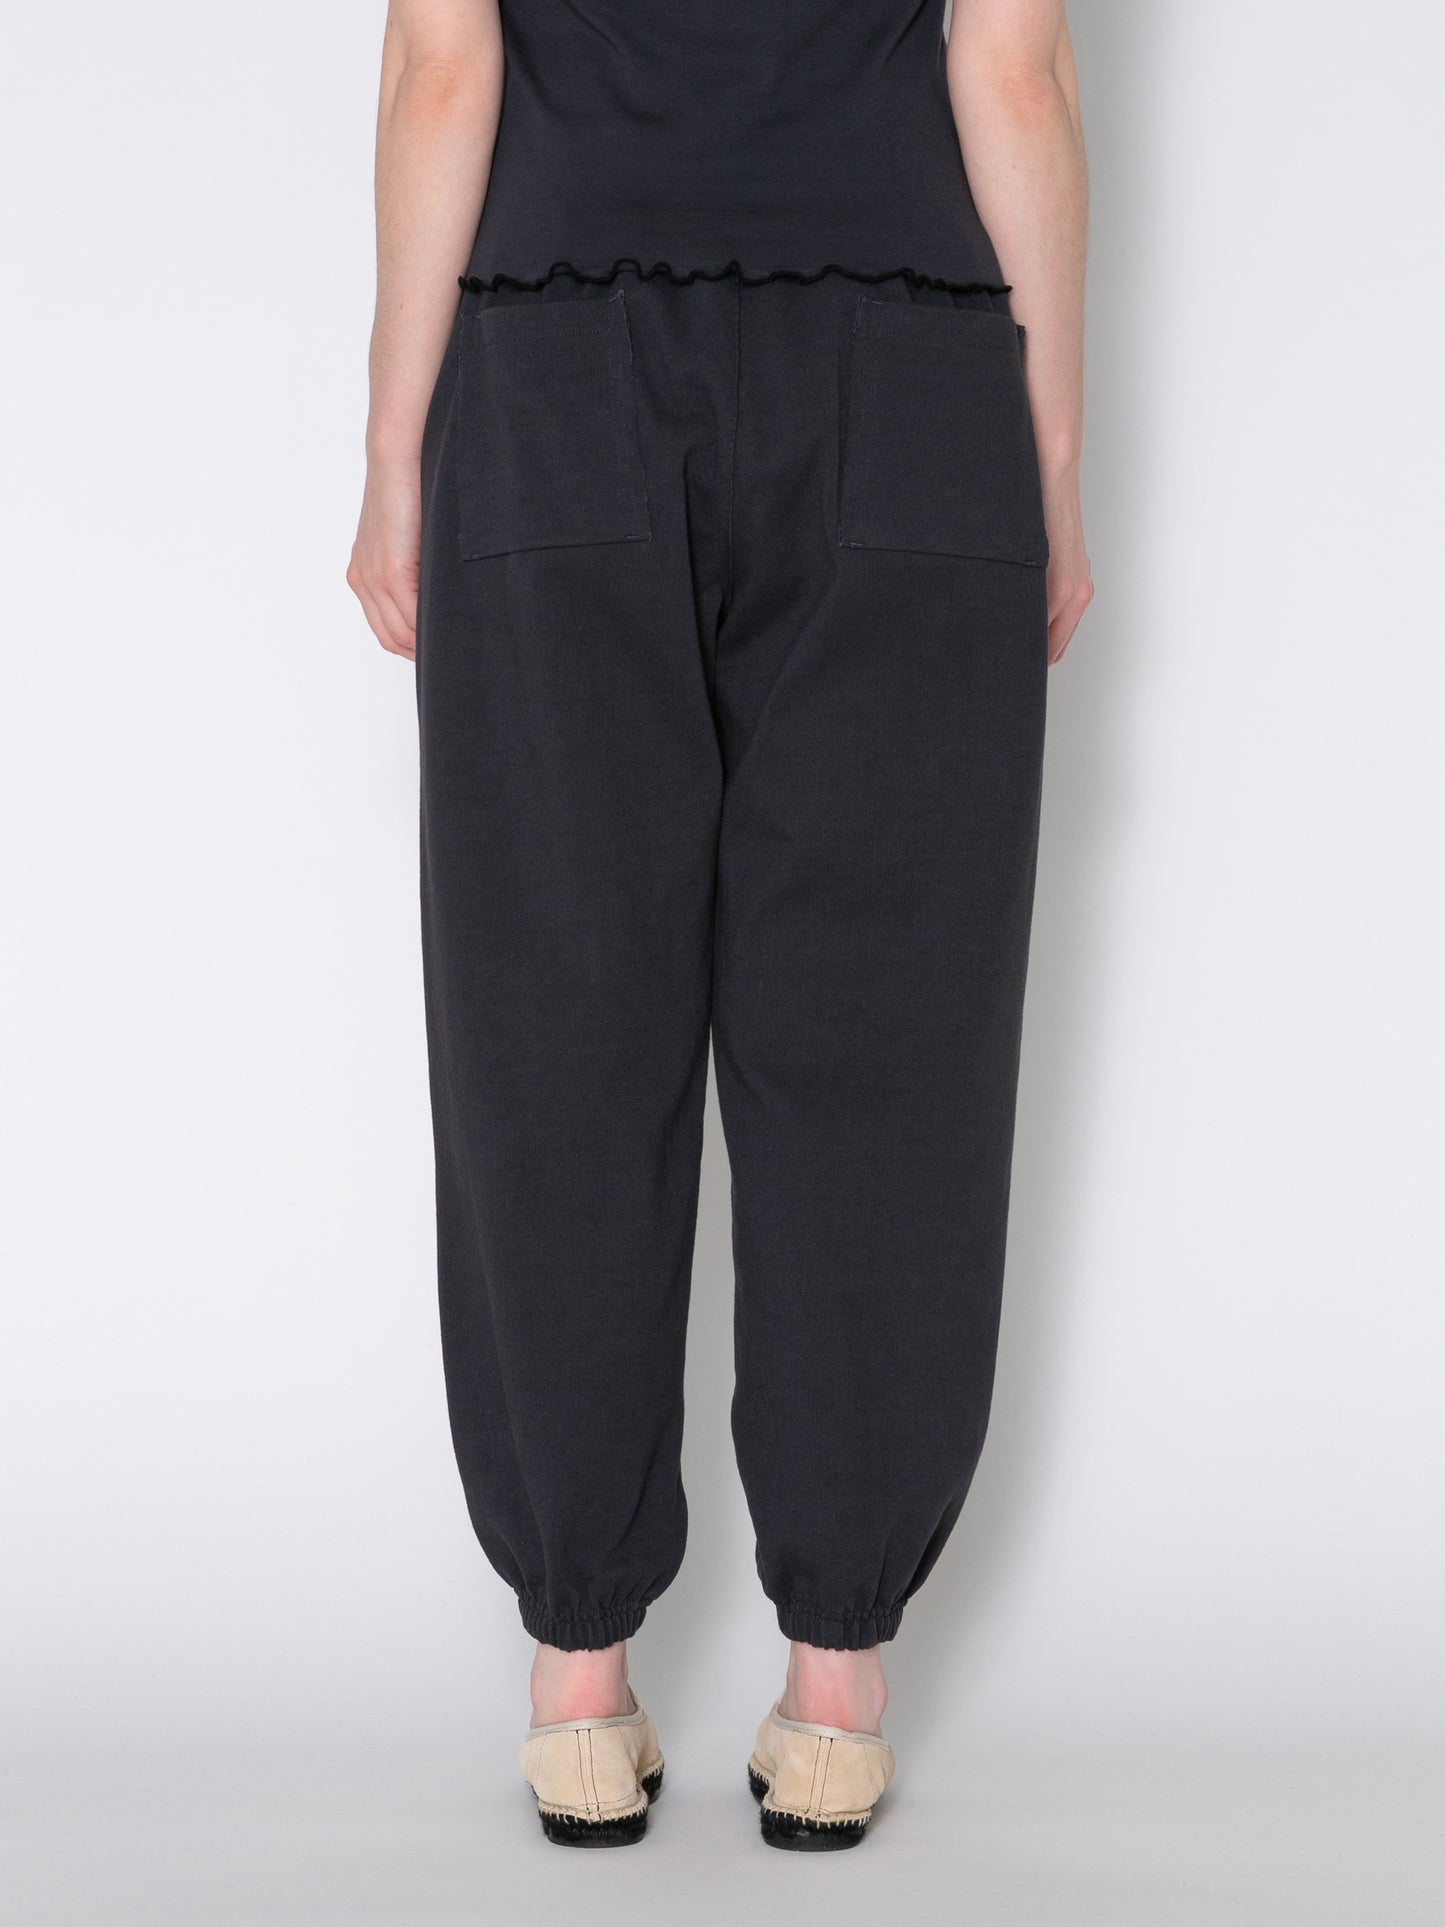 PHAT PANT US COTTON HEAVY JERSEY AM-P0006 Charcoal